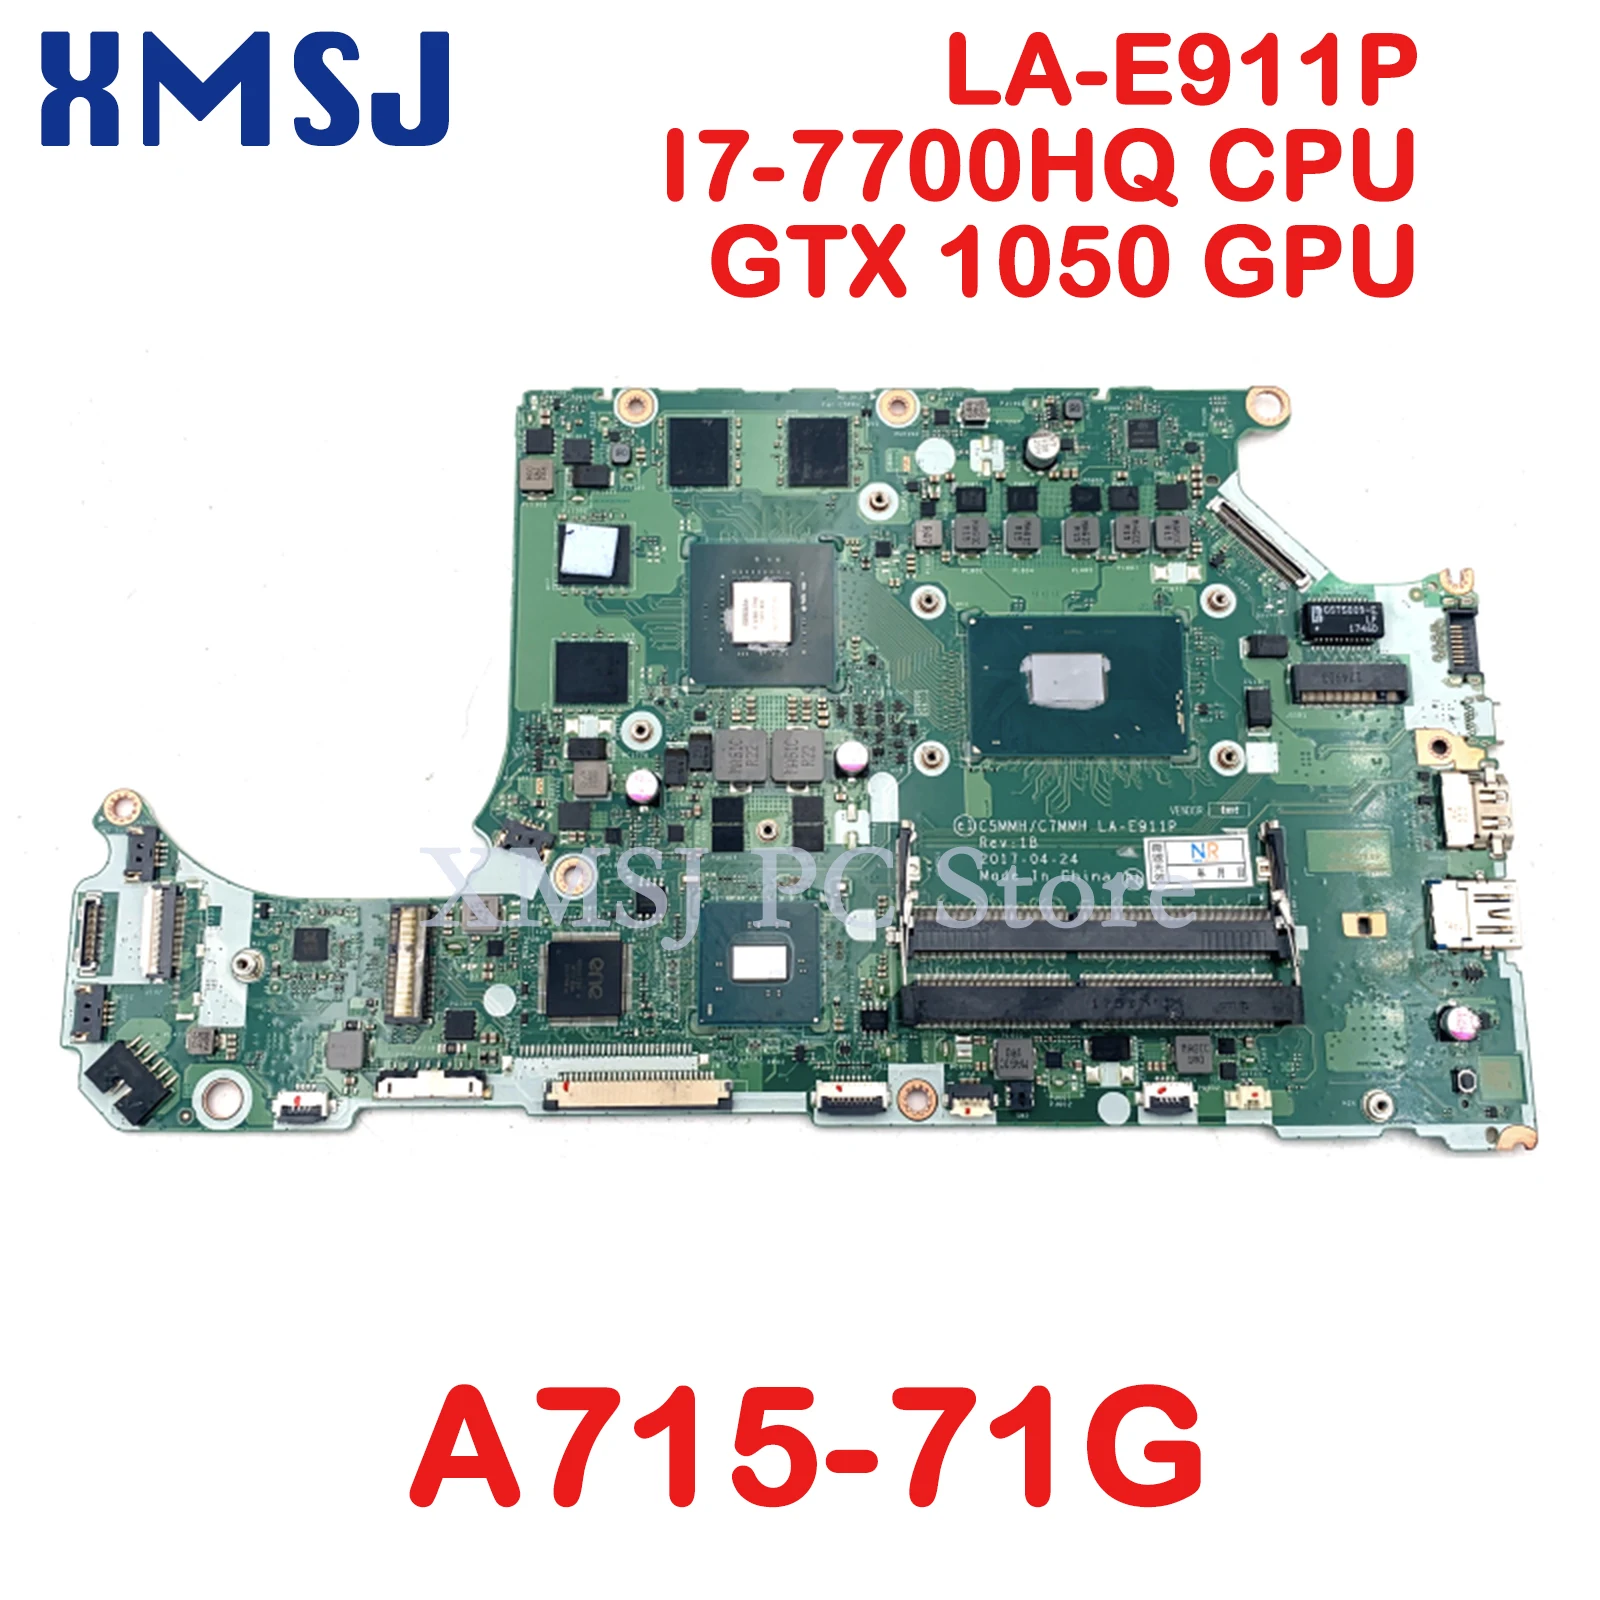 

XMSJ For Acer A715-71G Laptop Motherboard C5MMH C7MMH LA-E911 NBQ2Q11007 NB.Q2Q11.007 SR32Q I7-7700HQ CPU GTX 1050 GPU